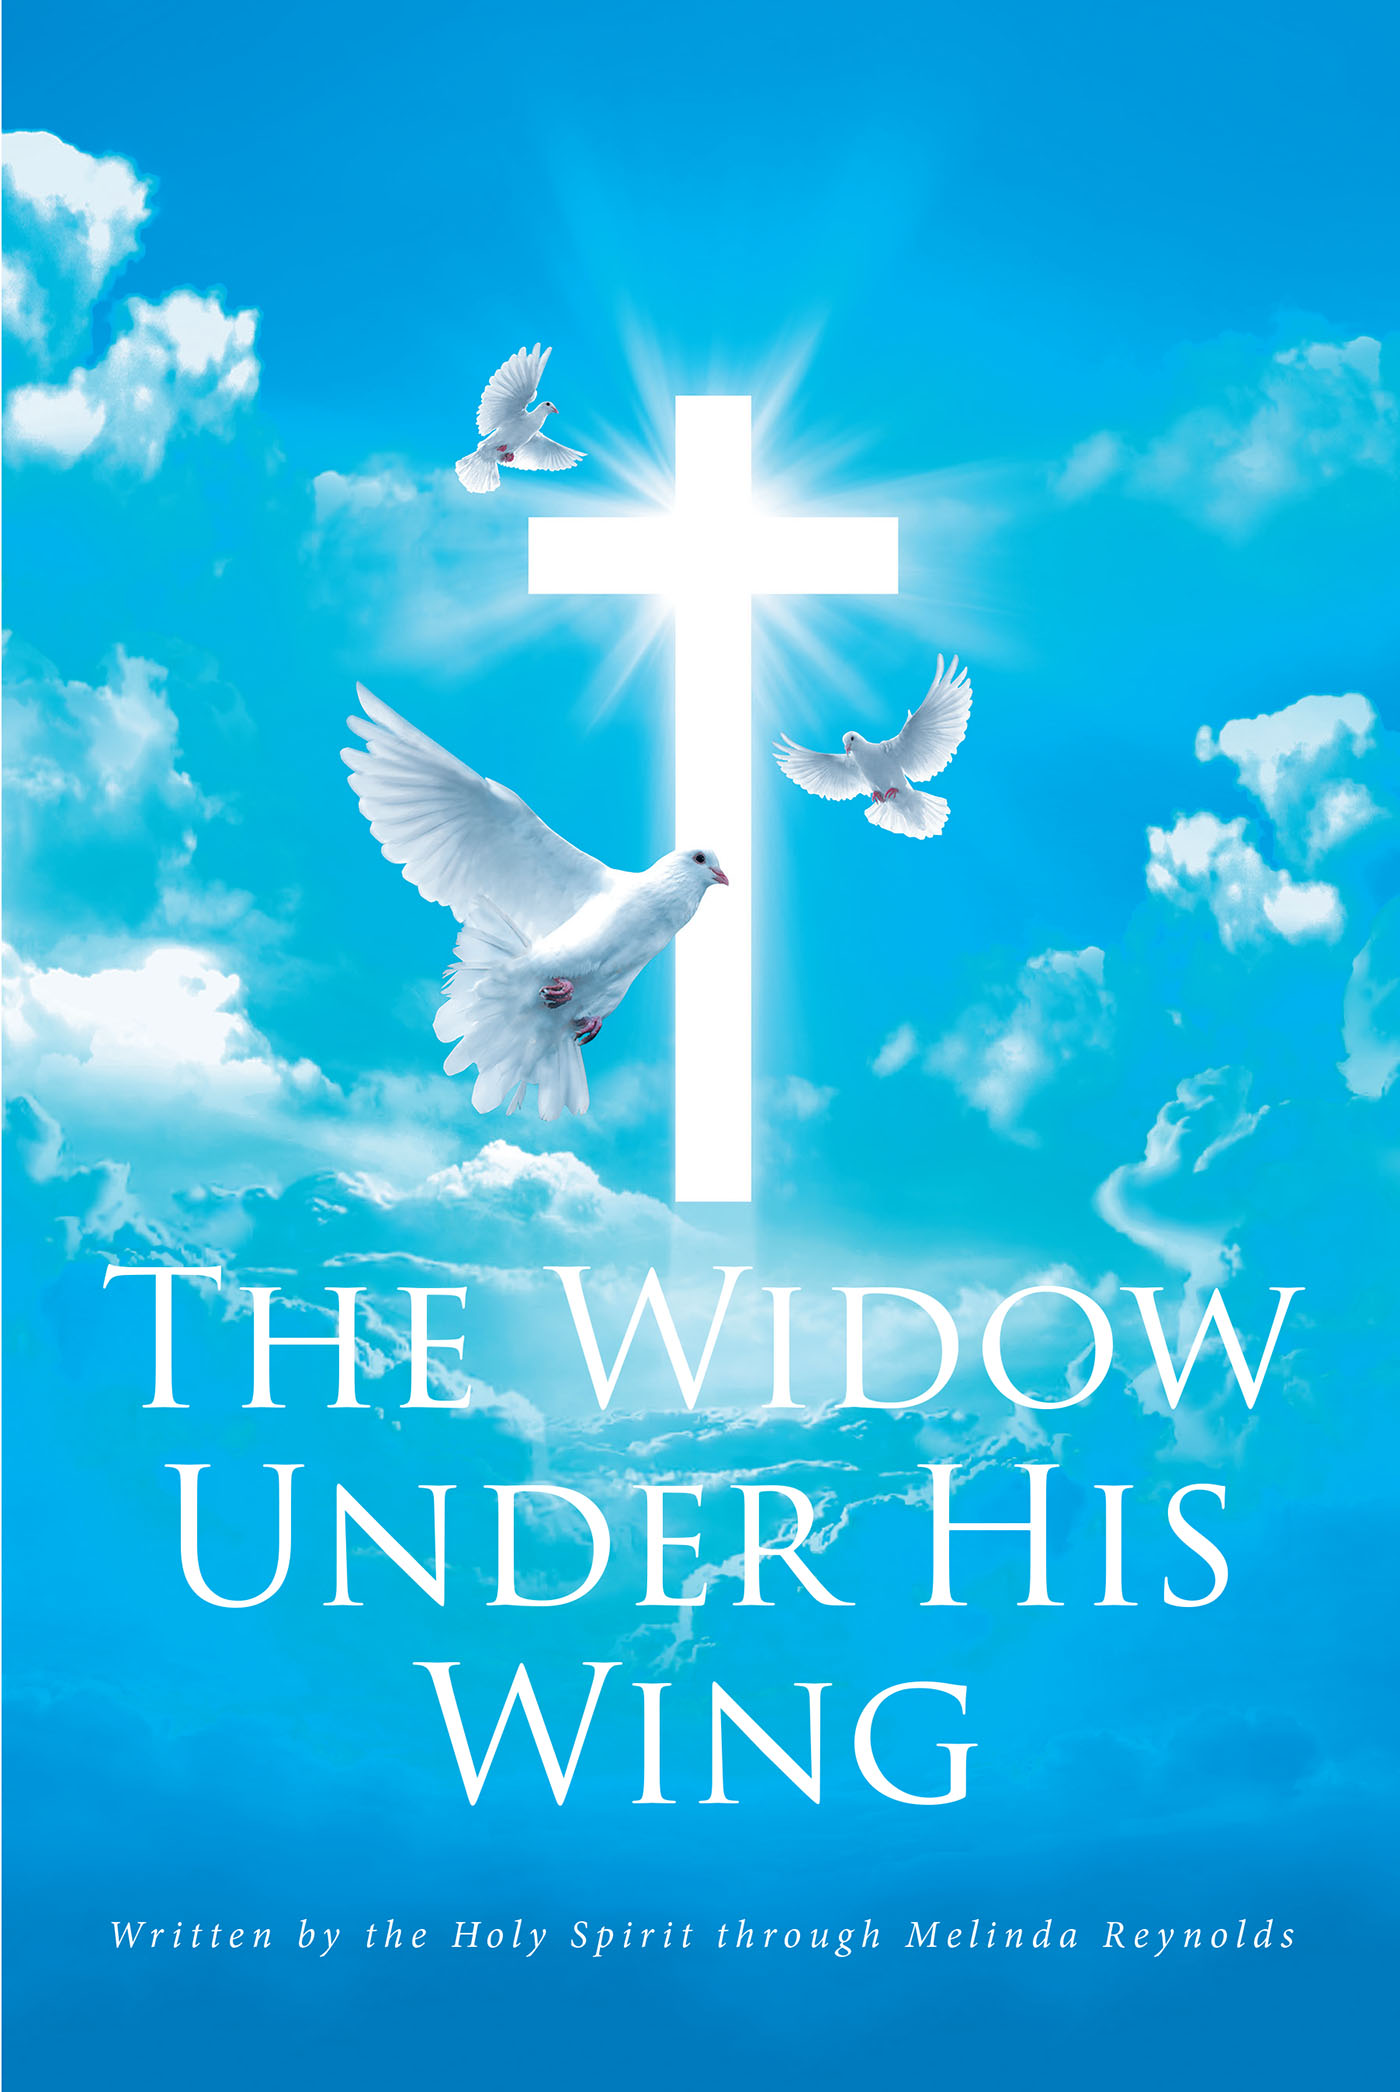 Written by the Holy Spirit Through Melinda Reynolds’s Newly Released "The Widow Under His Wing" is a Message of Comfort to Those Grieving a Loss